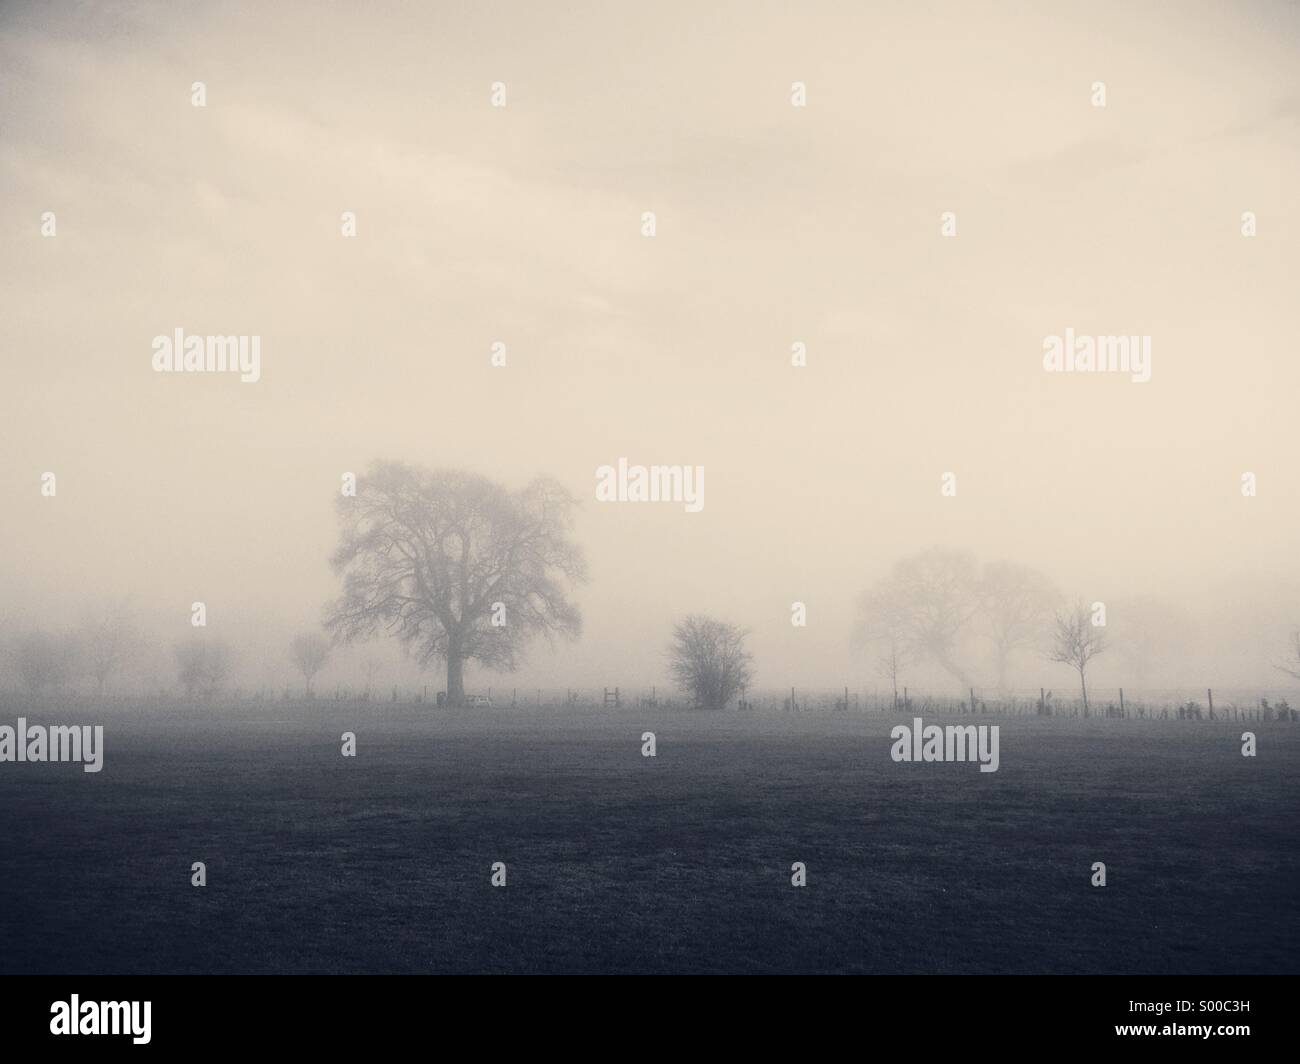 A misty morning in Wiltshire. Stock Photo